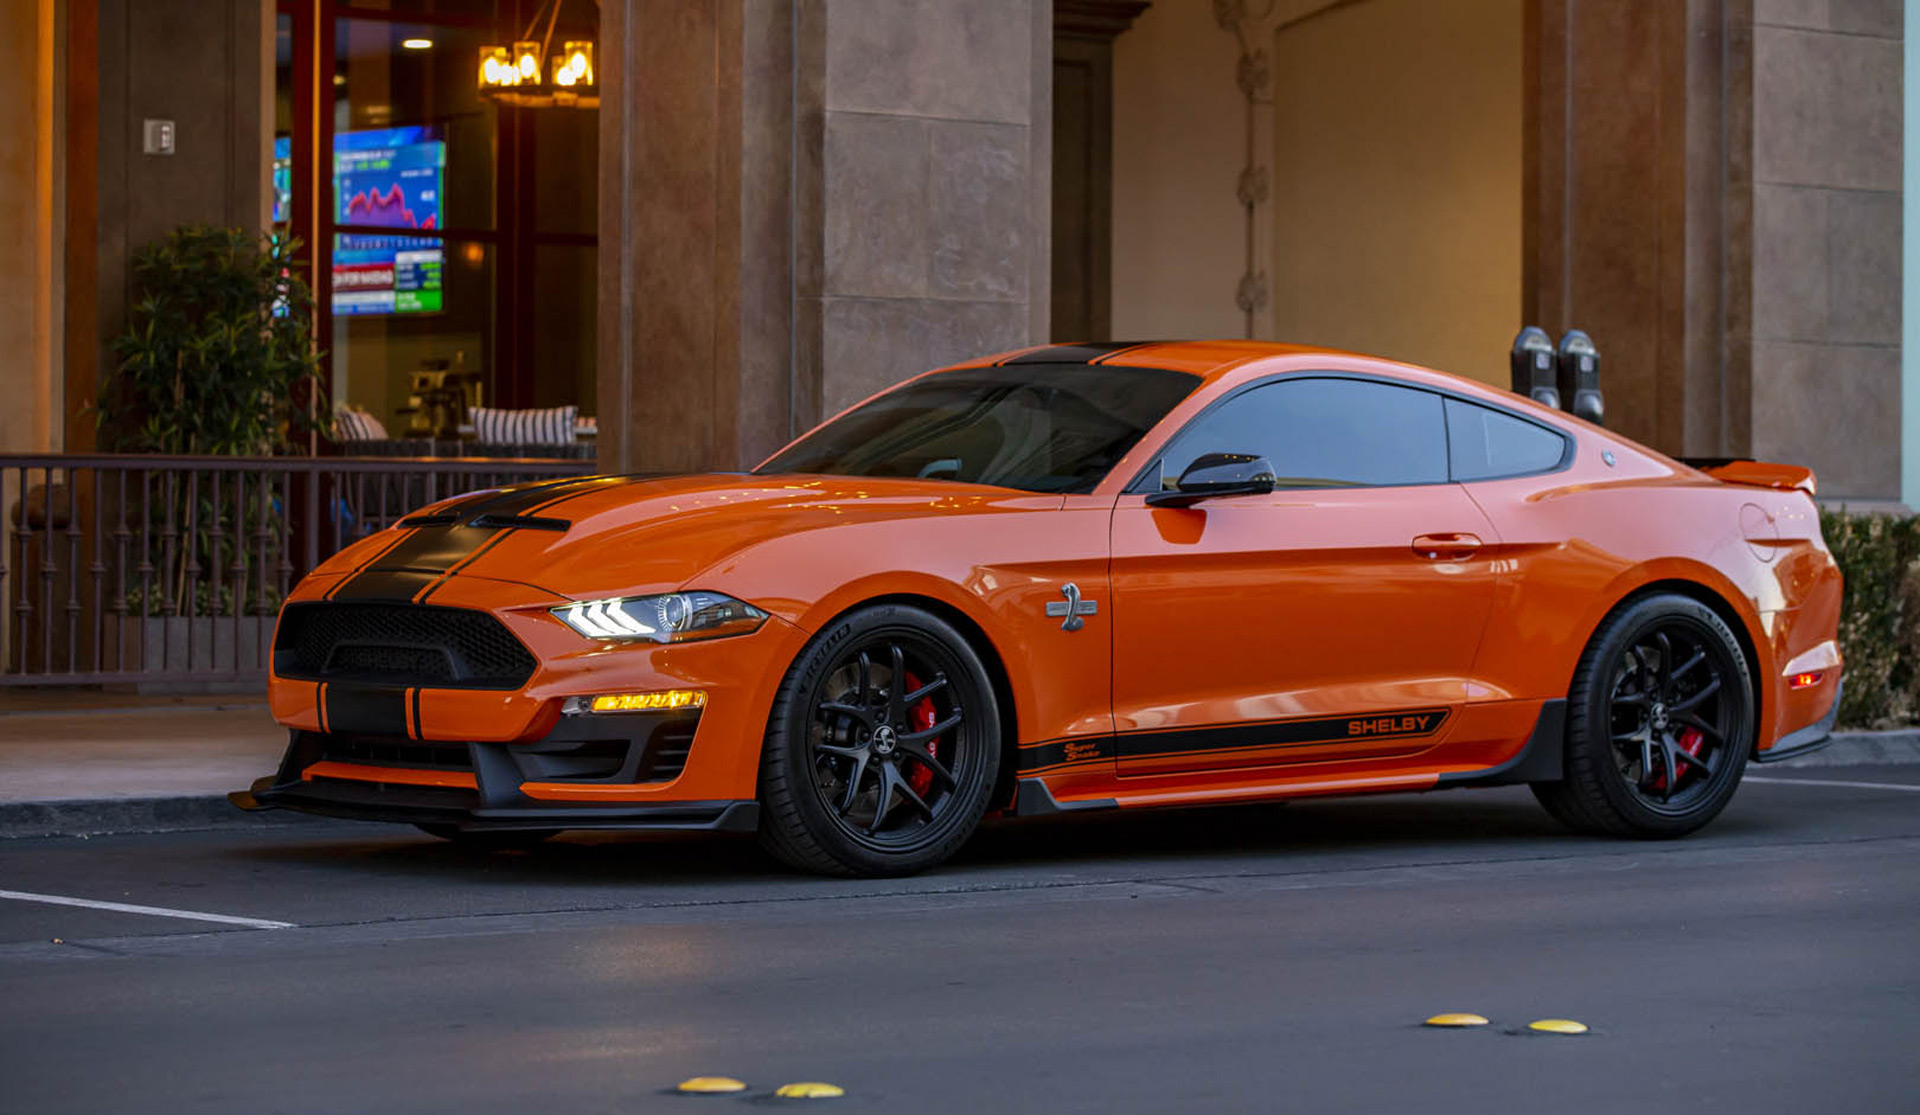 Mustang Of The Day: 2020 Shelby Super Snake